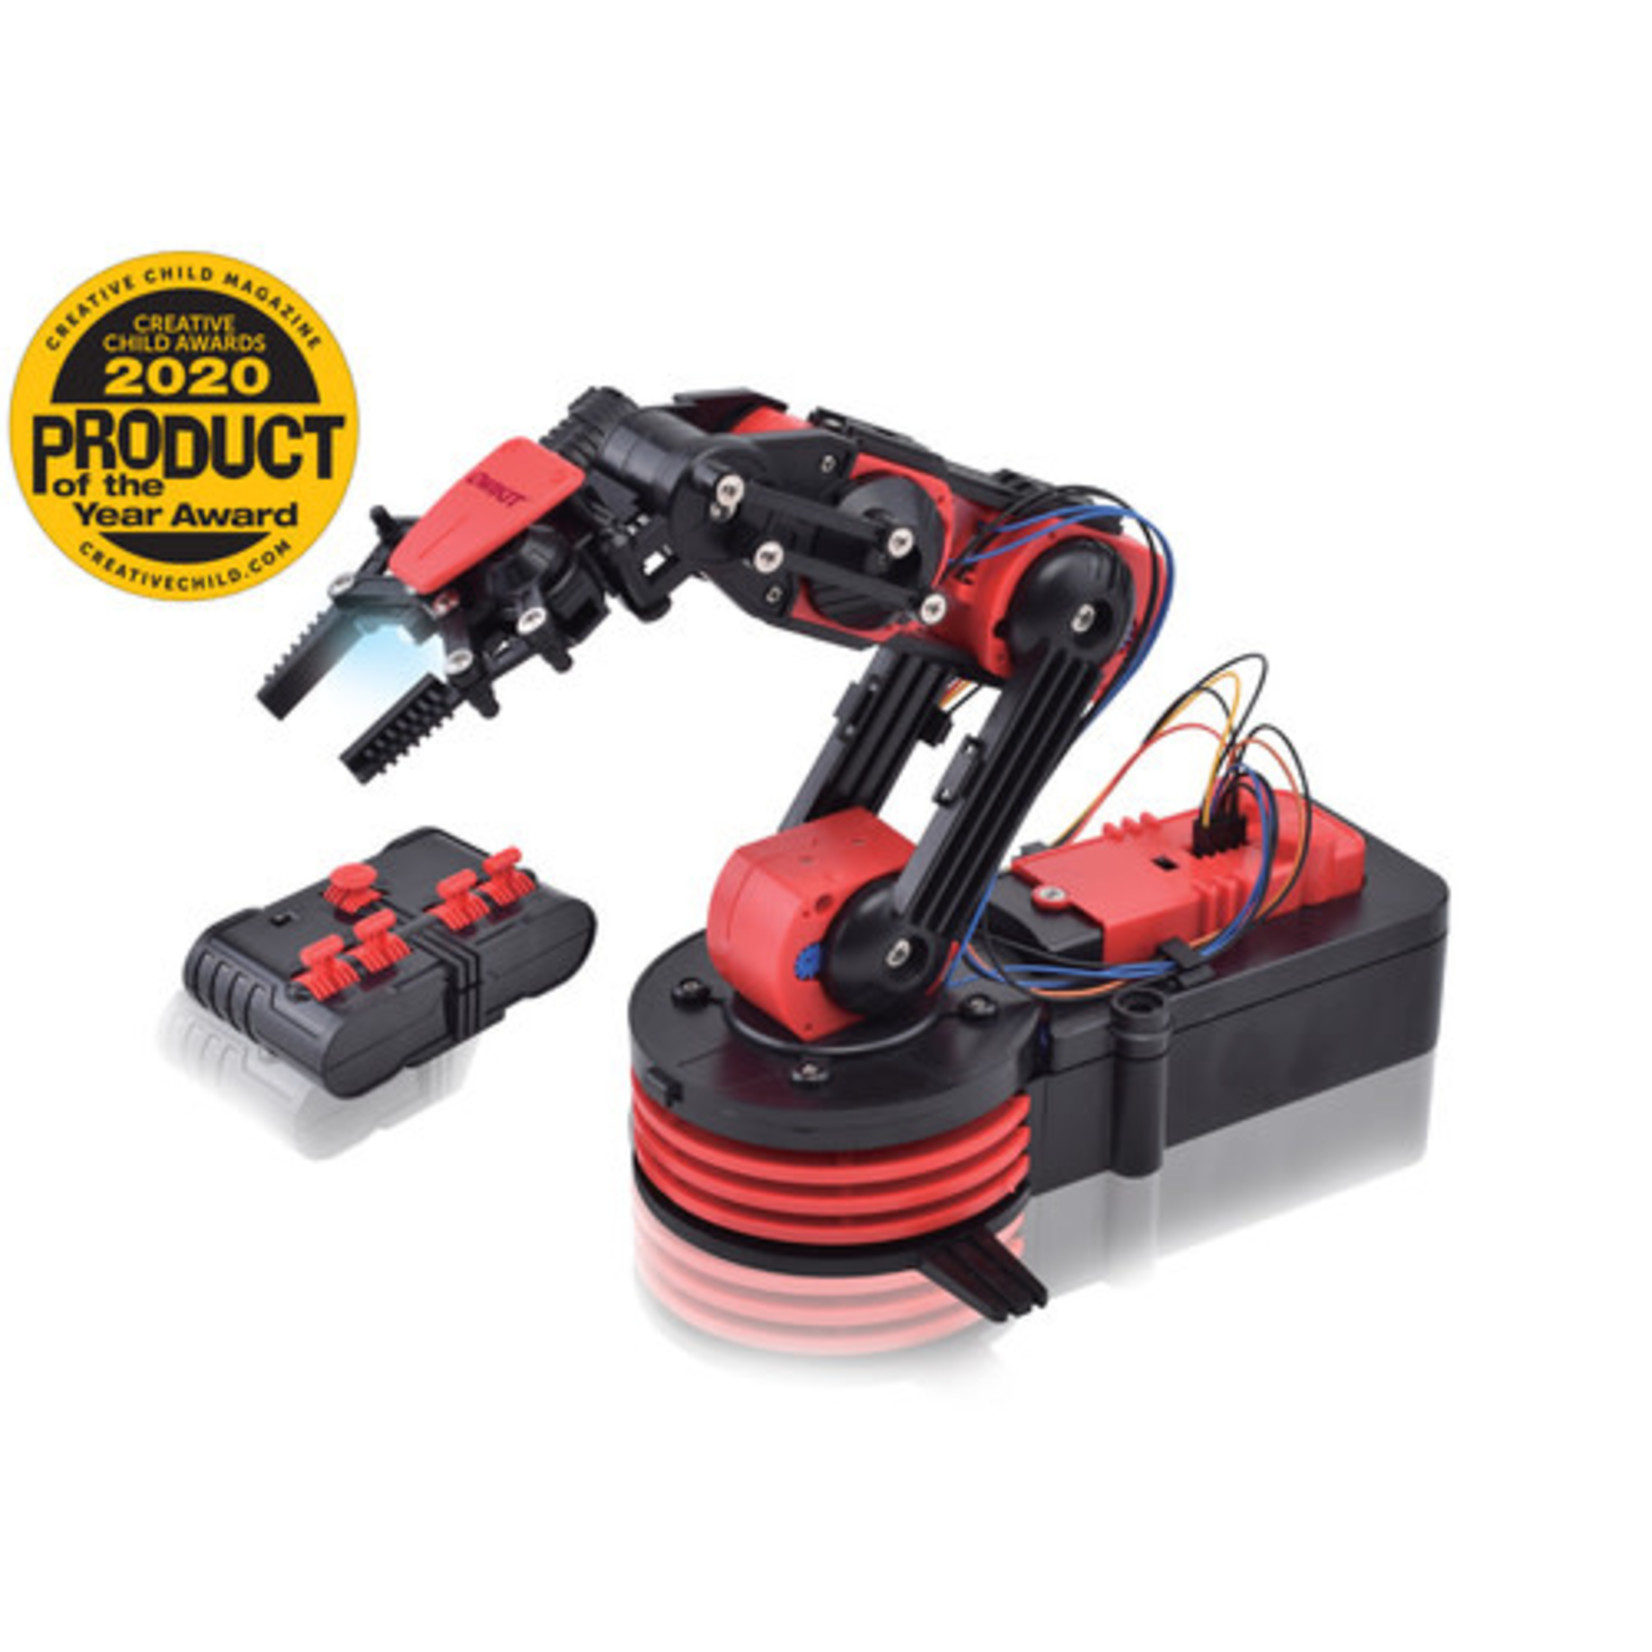 OWIKIT OWIKIT Robotic Arm Edge - Wireless #OWI-537